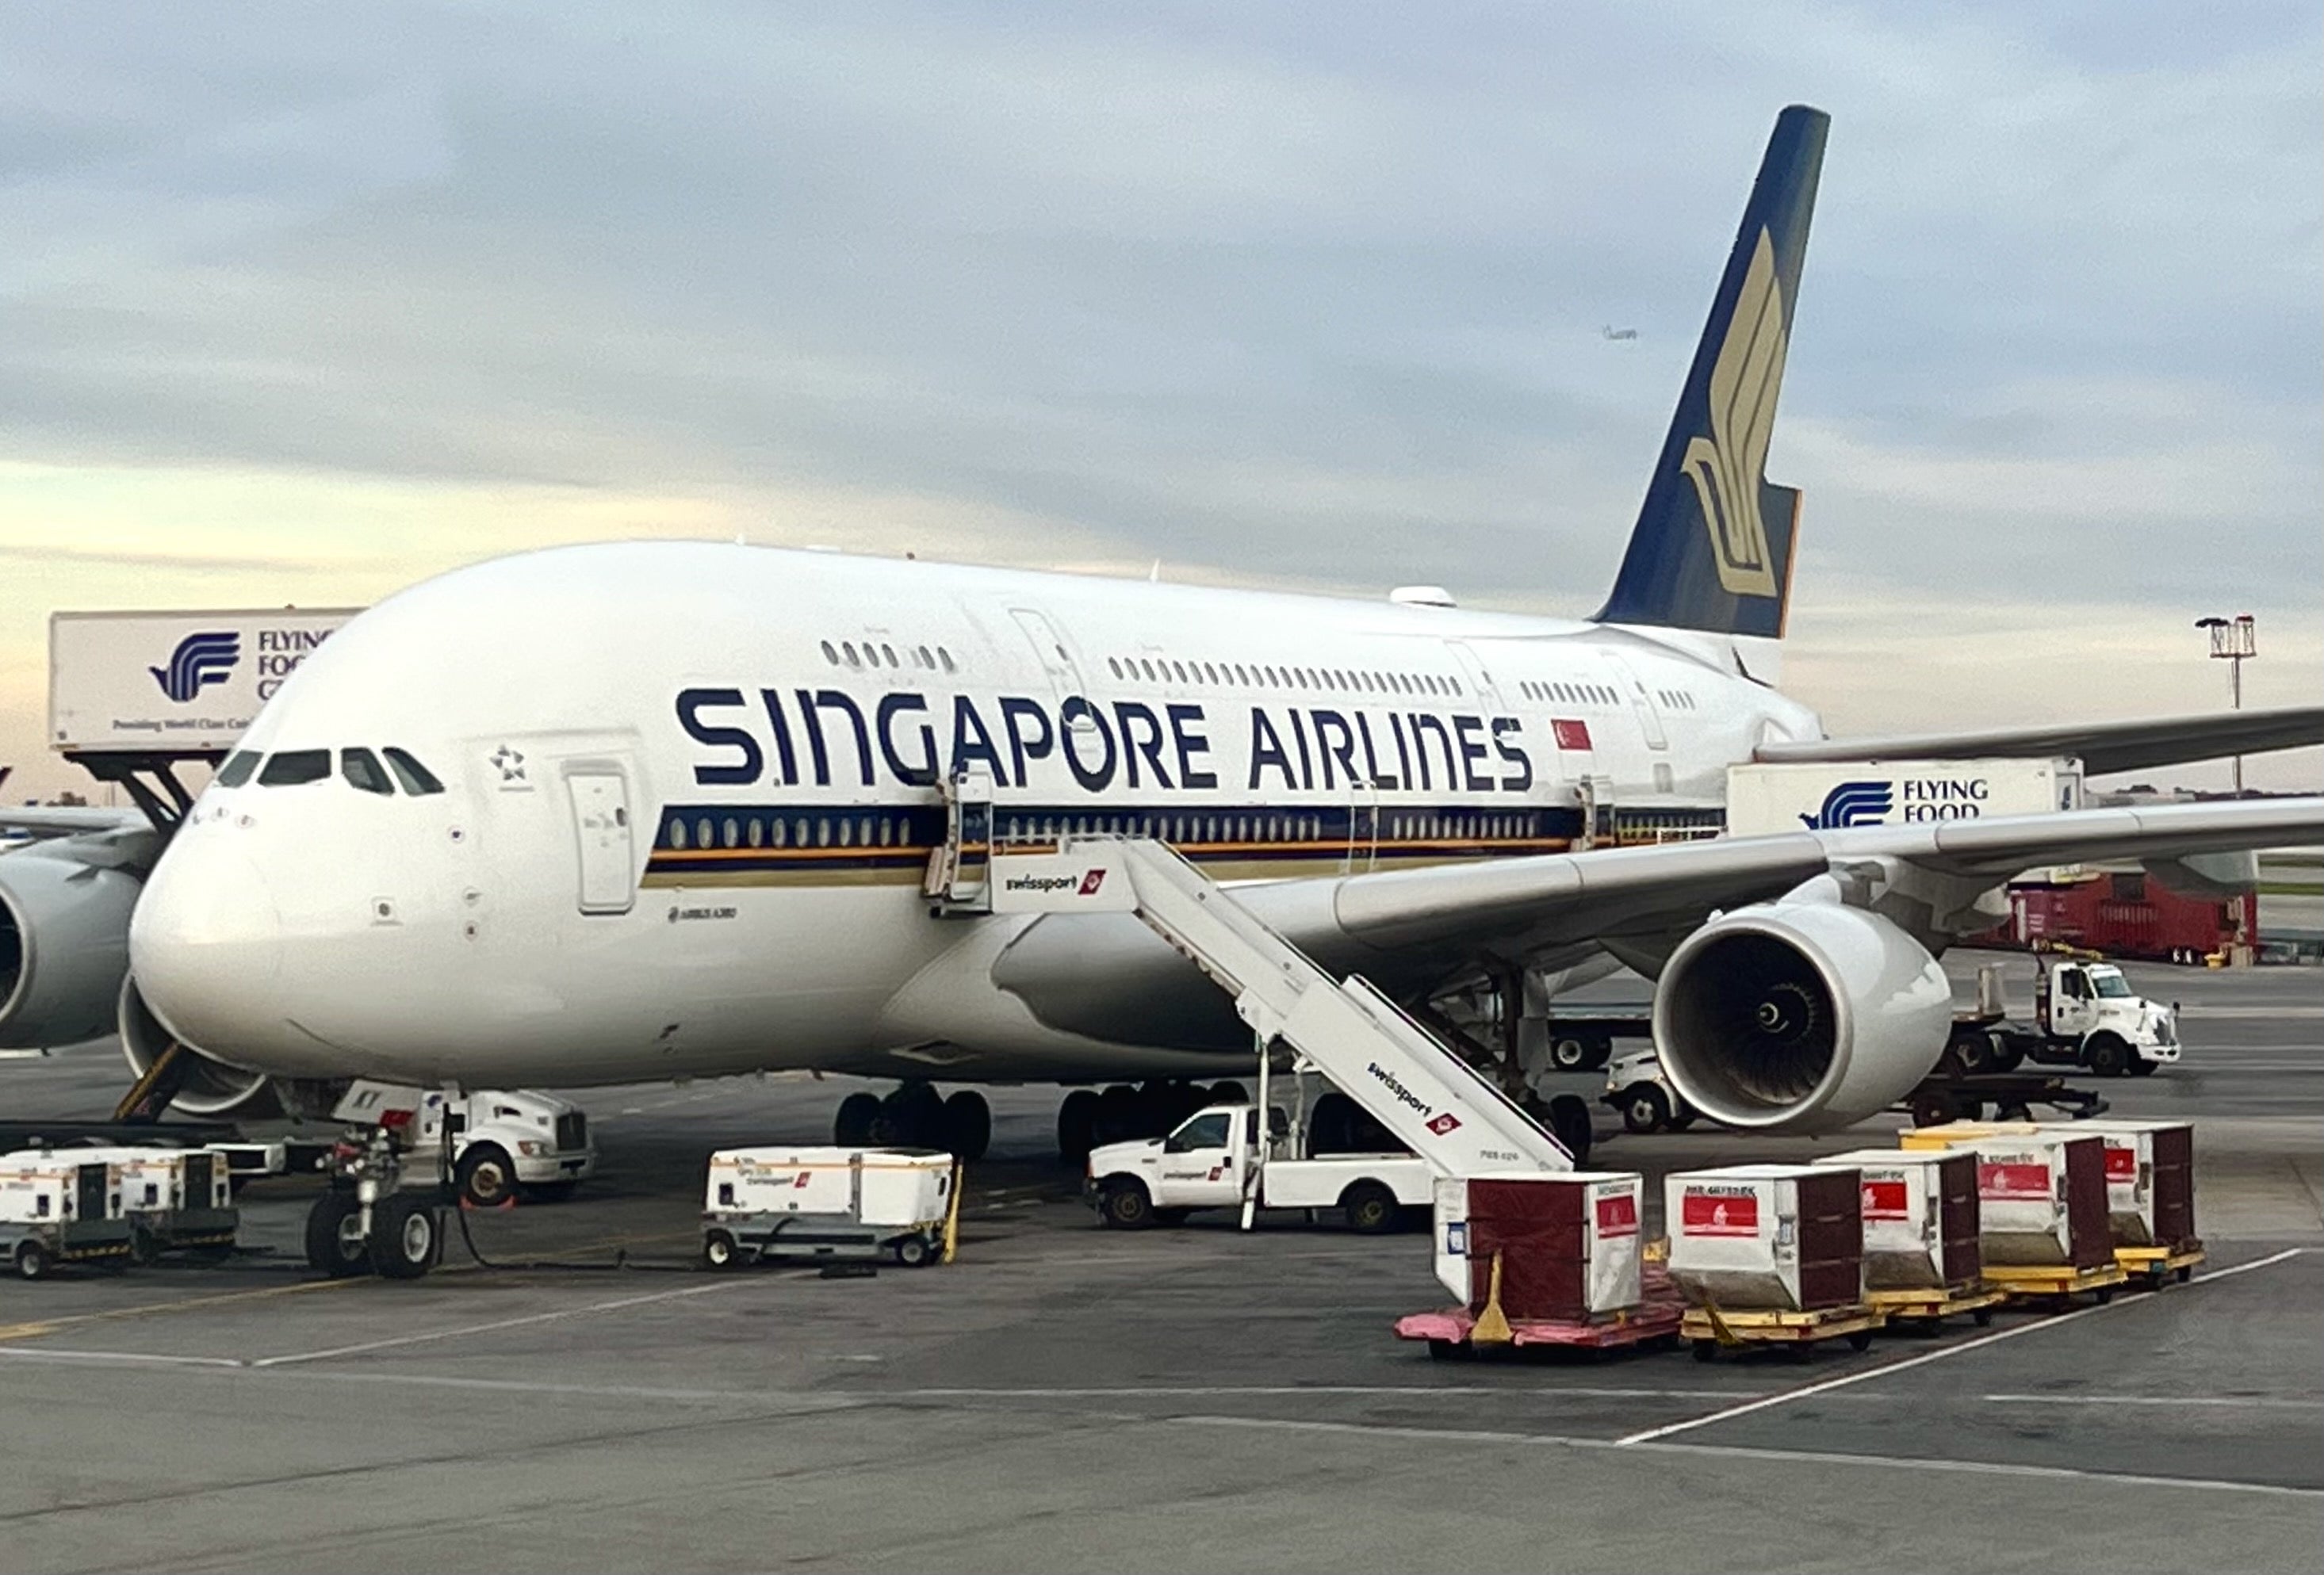 Singapore Airlines A380 at JFK